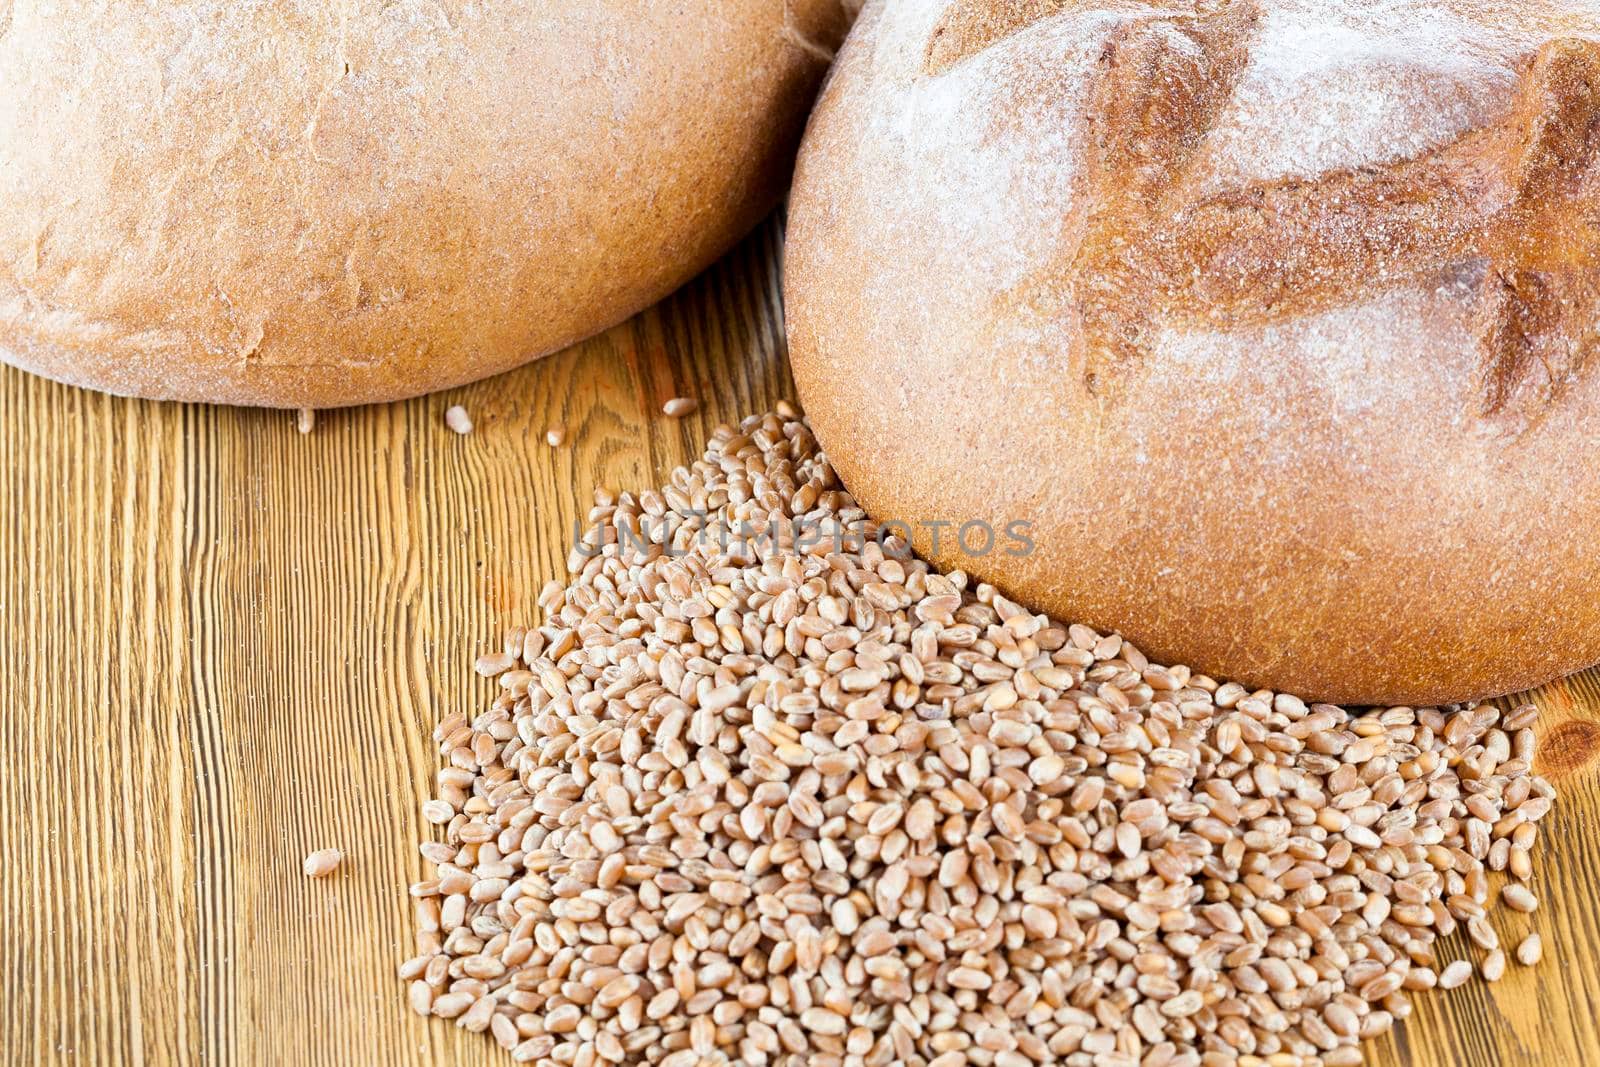 a loaf of whole grain bread and wheat grains stacked on a wooden table, closeup from the top